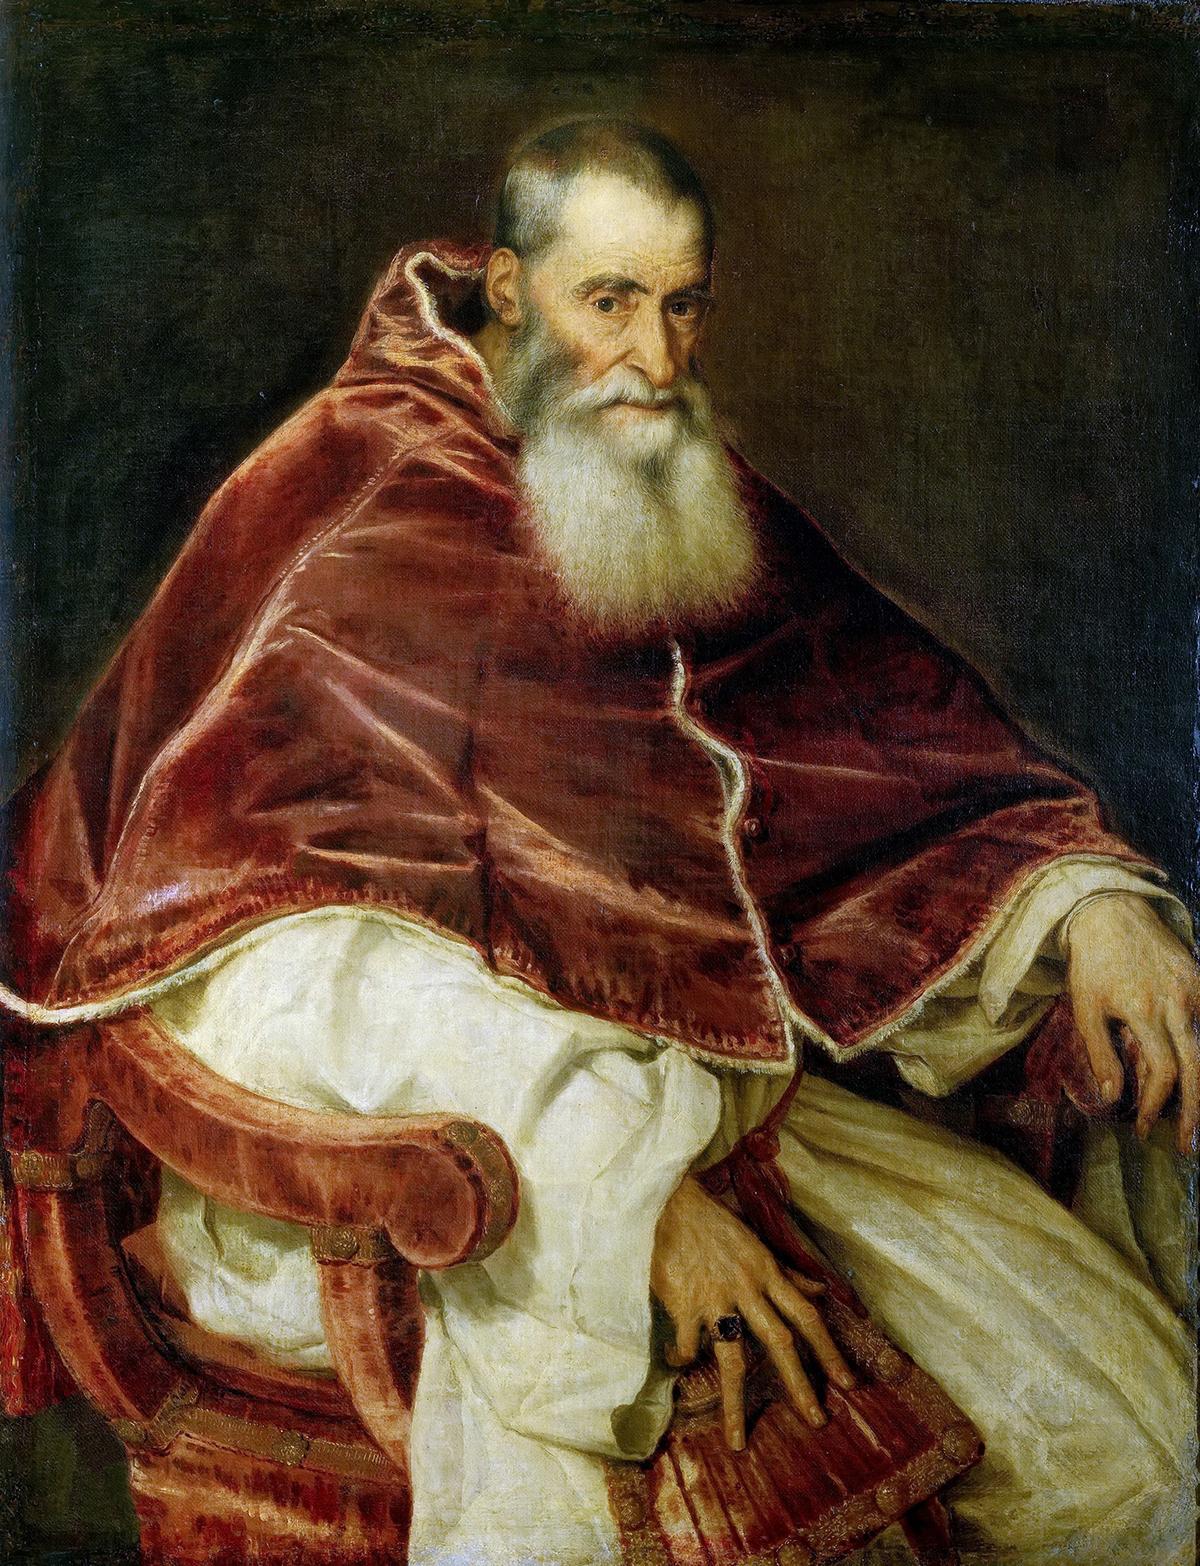 Portrait of Pope Paul III, 1543, by Titian. Oil on canvas; 41.7 inches by 33.4 inches. National Museum of Capodimonte, Naples, Italy. (Public Domain)